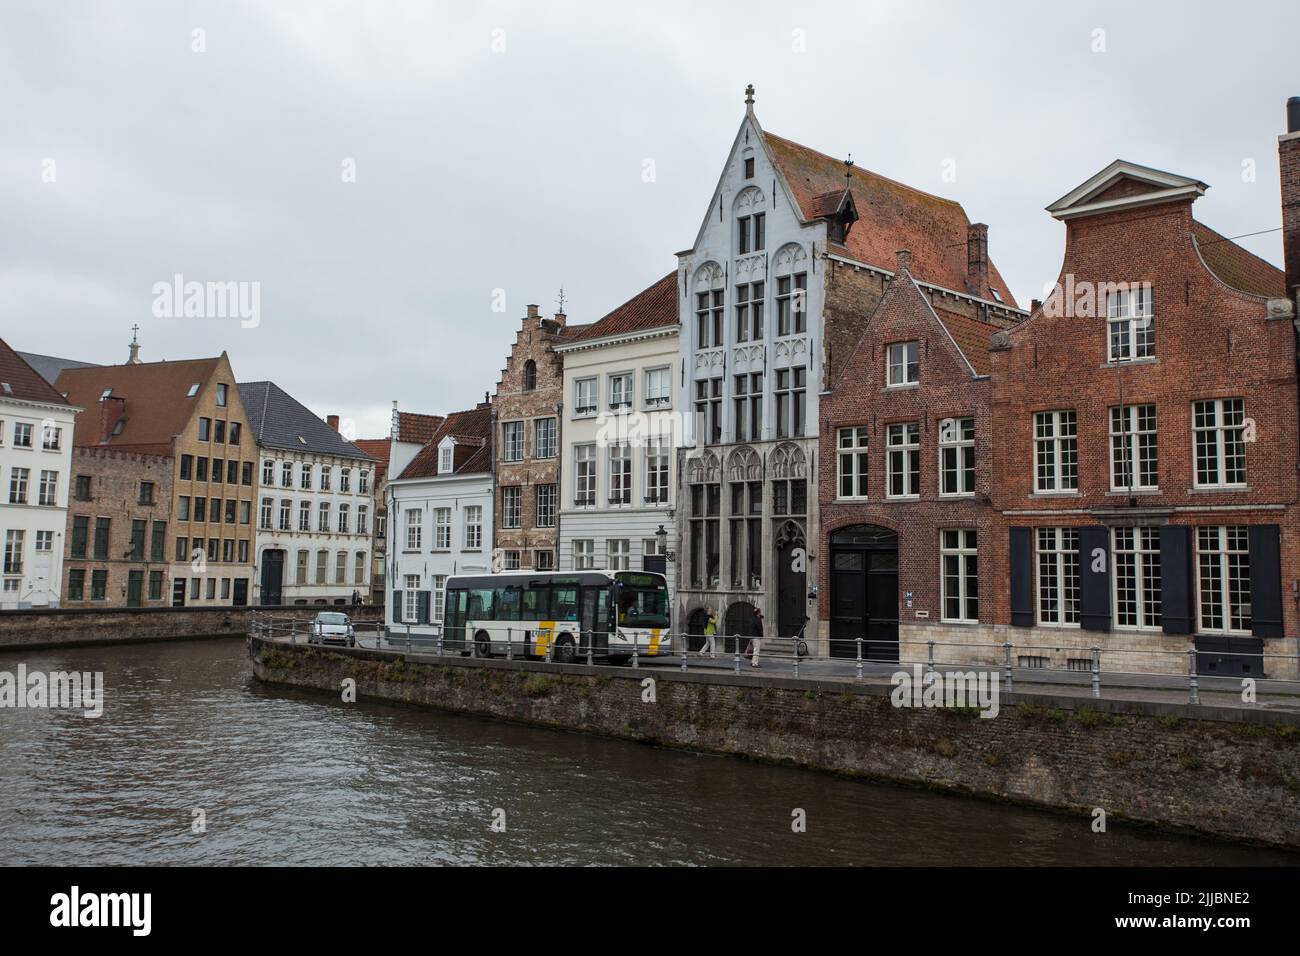 Streets of Brugges, Belgium, Europe, street scene with part of city's canal network Stock Photo